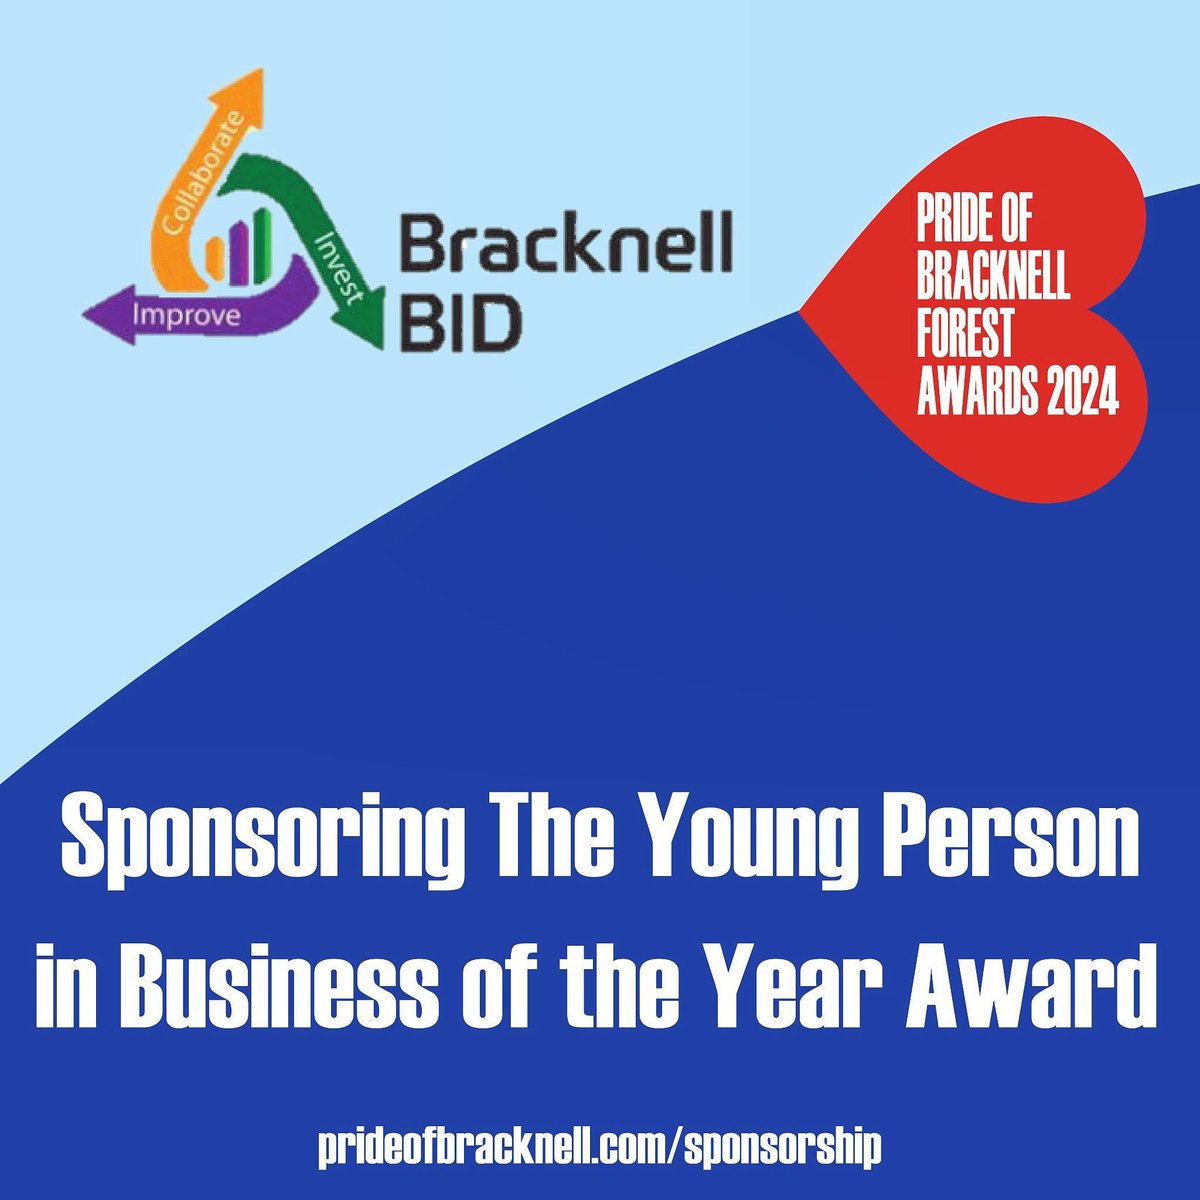 Tonight we'll be celebrating the @PoBFA 2024 🎉 

@BracknellBID is sponsoring the #YoungPerson in #Business of the Year #Award within #BracknellForestCommunity 🙌 

🏆 Did you nominate the #winner? Find out ➡️ bit.ly/4al8Tfc 

📍 The Awards Ceremony is at @RMASandhurst